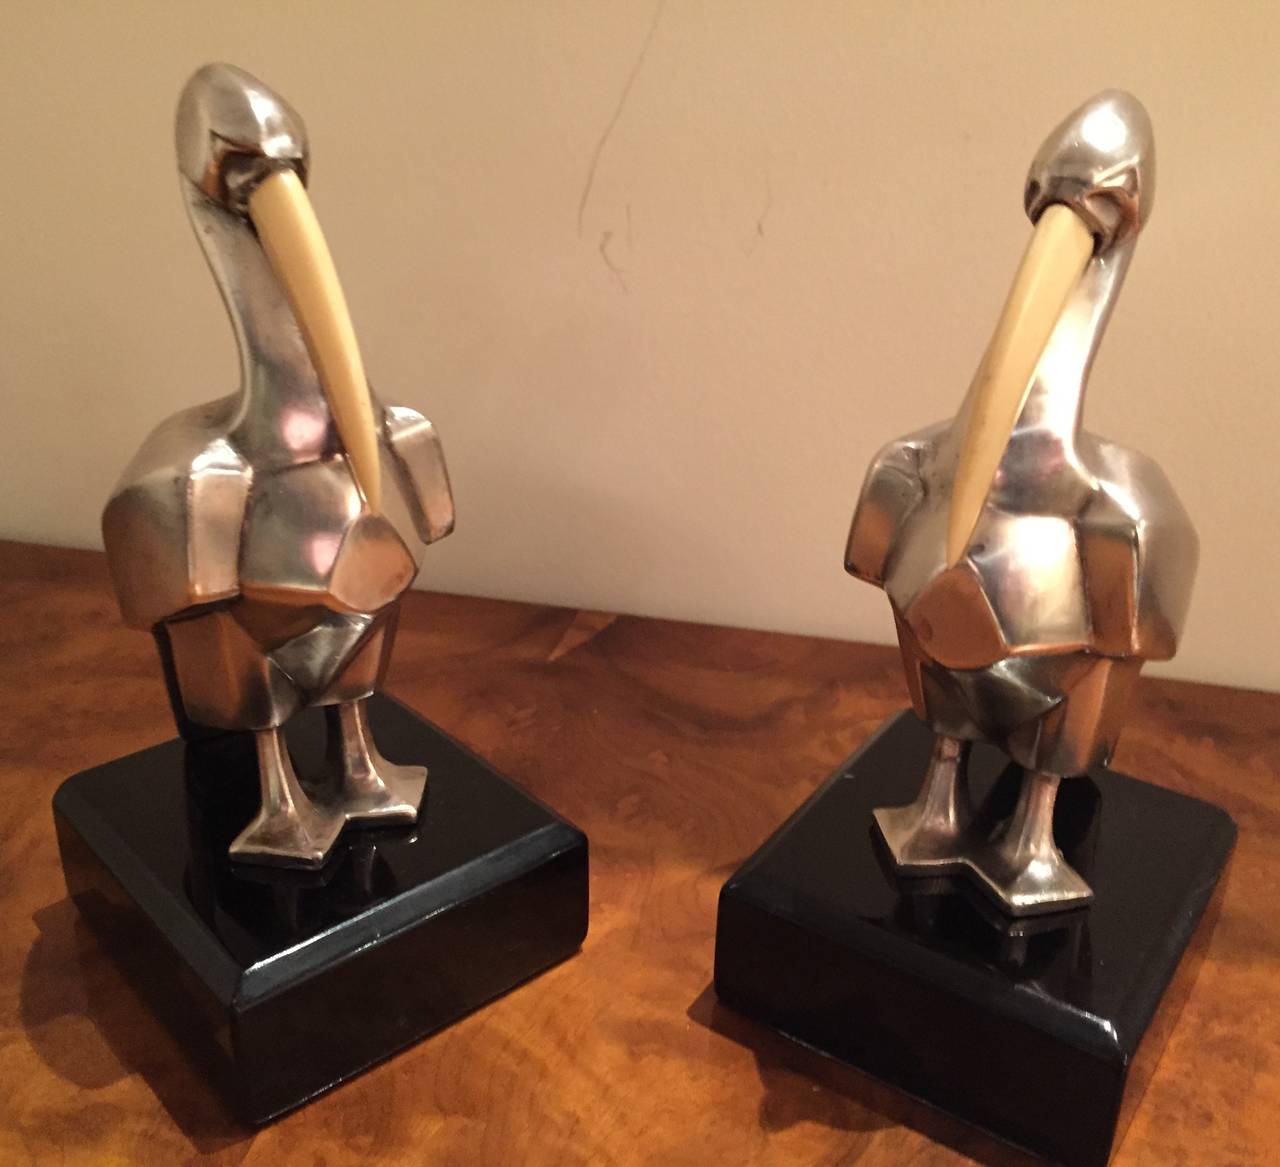 Unique cubist style Pelican bookends. Beautifully rendered with the stylized details of true art. This matching pair has been newly restored in silver. The elongated beaks seem to be an invorid material and lend an additional element to the overall